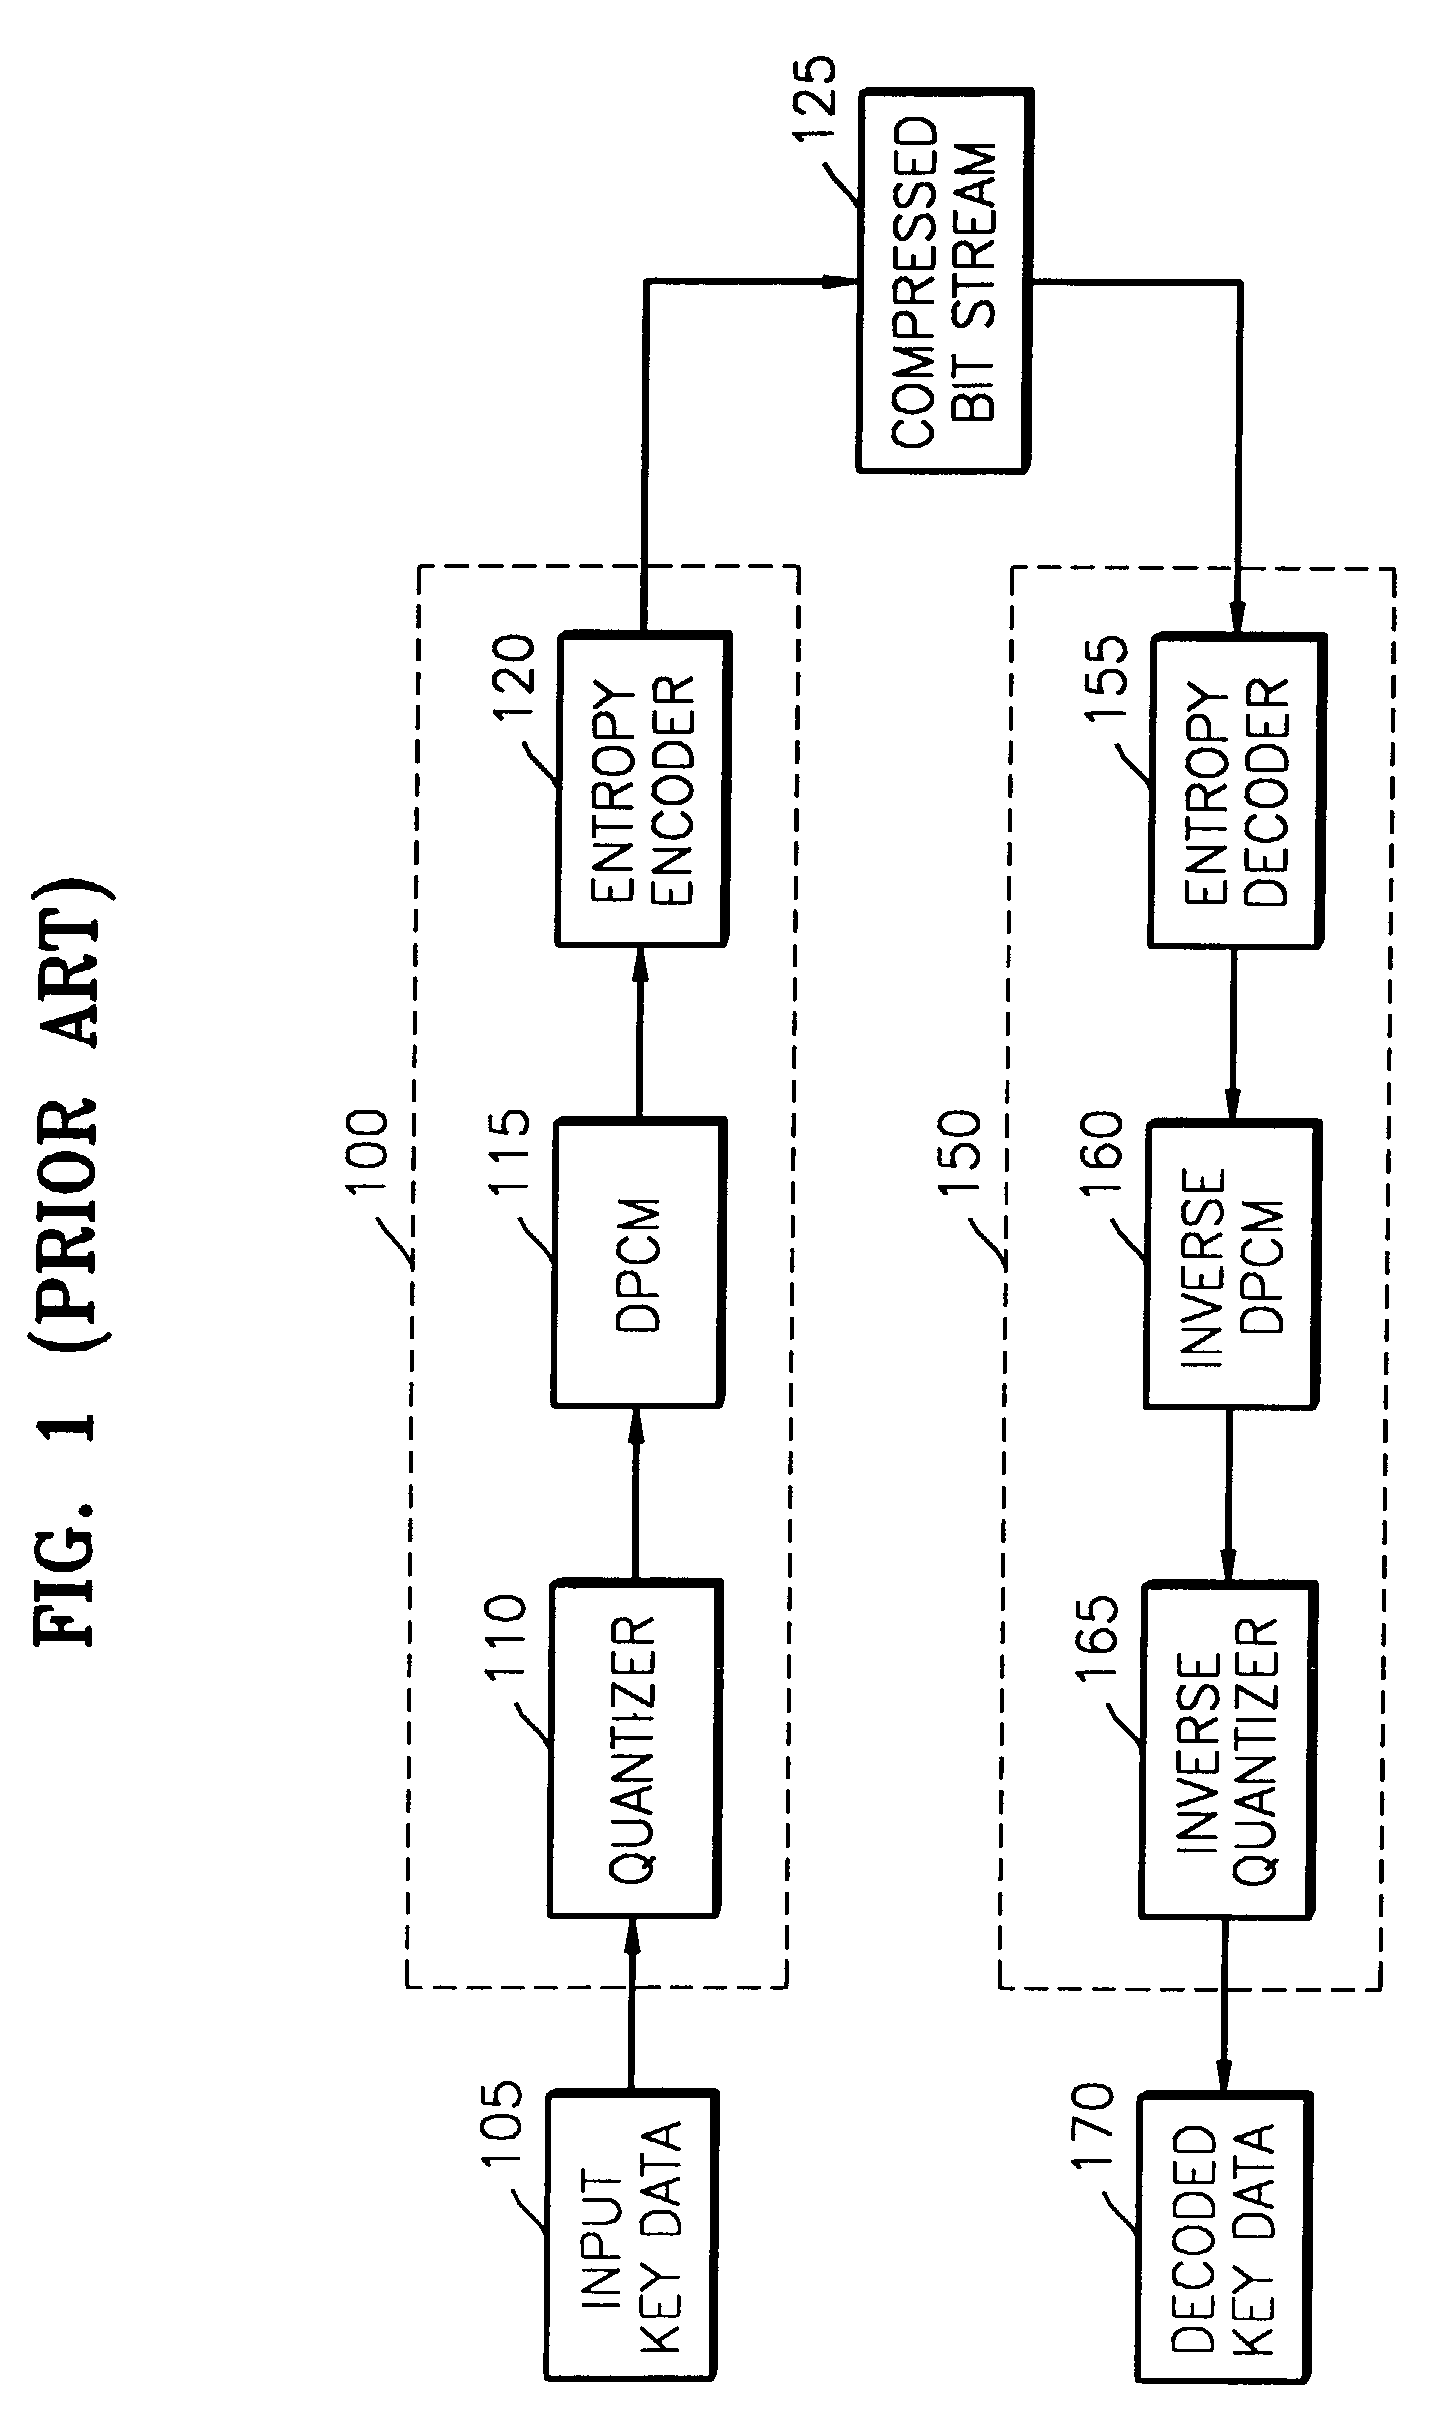 Method and apparatus for encoding and decoding key data